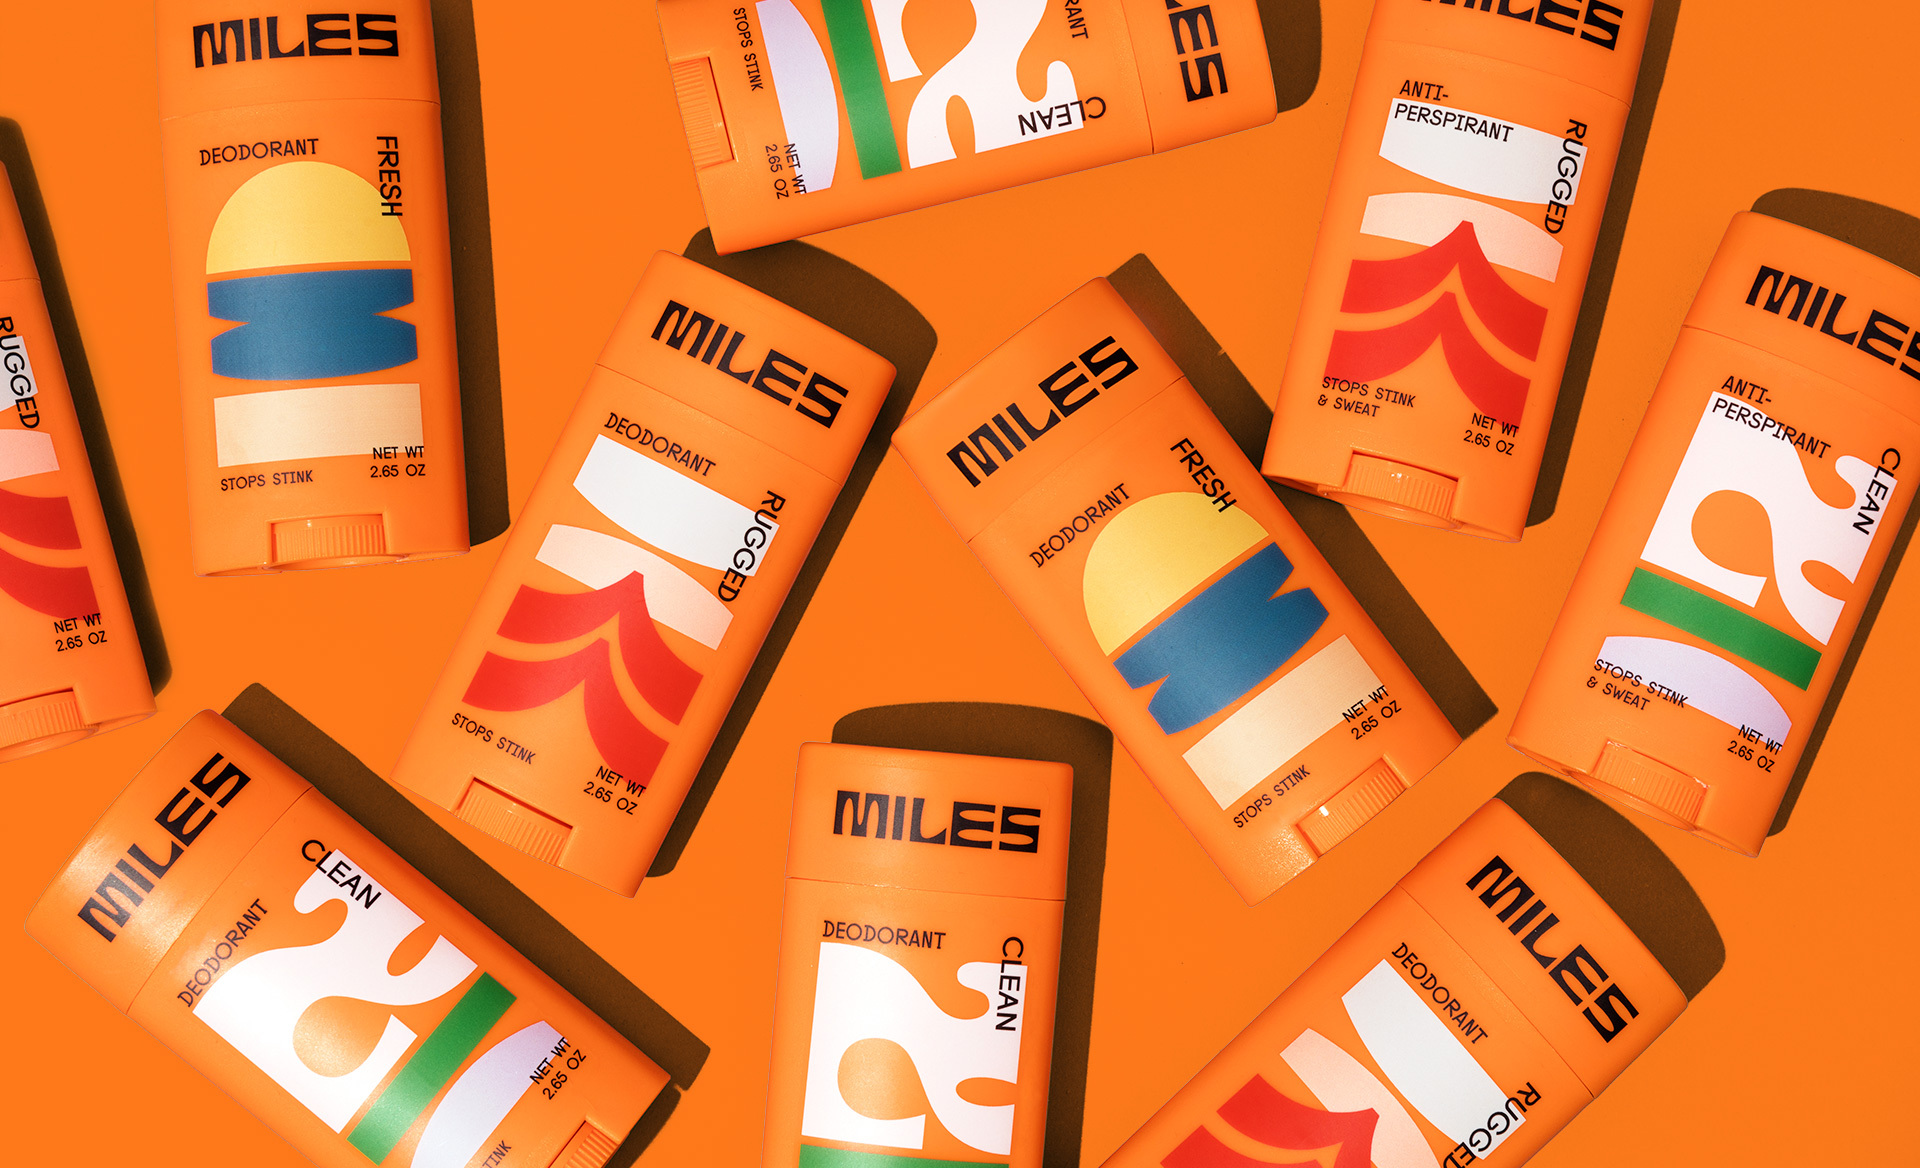 Pack of the Month: Buddy Buddy Leans Into a Non-Gendered Look For Teen Deodorant Brand Miles